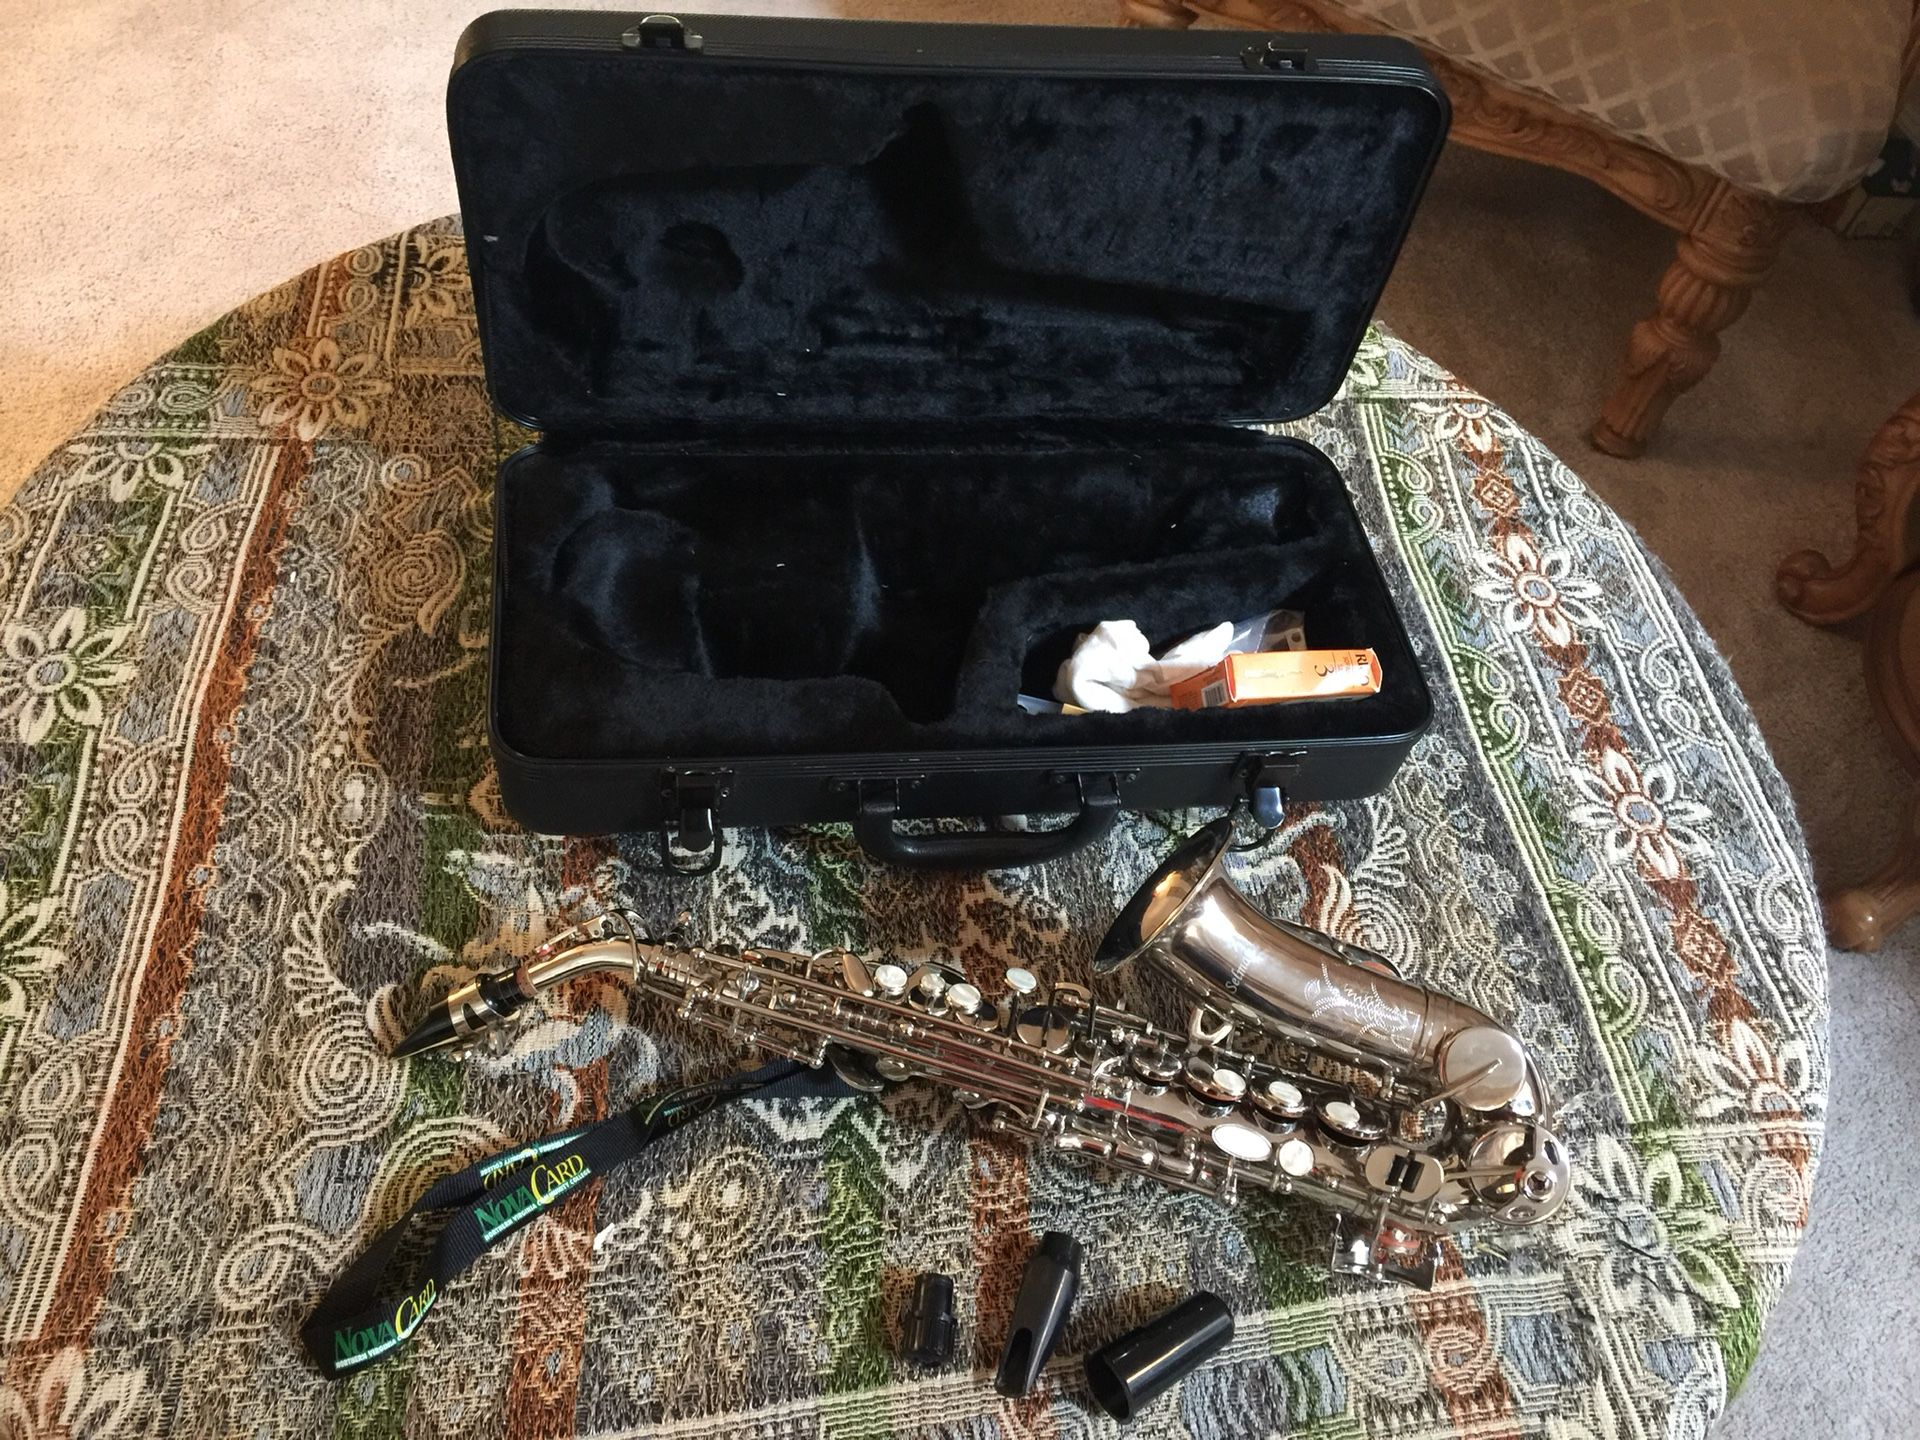 Very small baby soprano saxophone by Selmer in excellent condition.